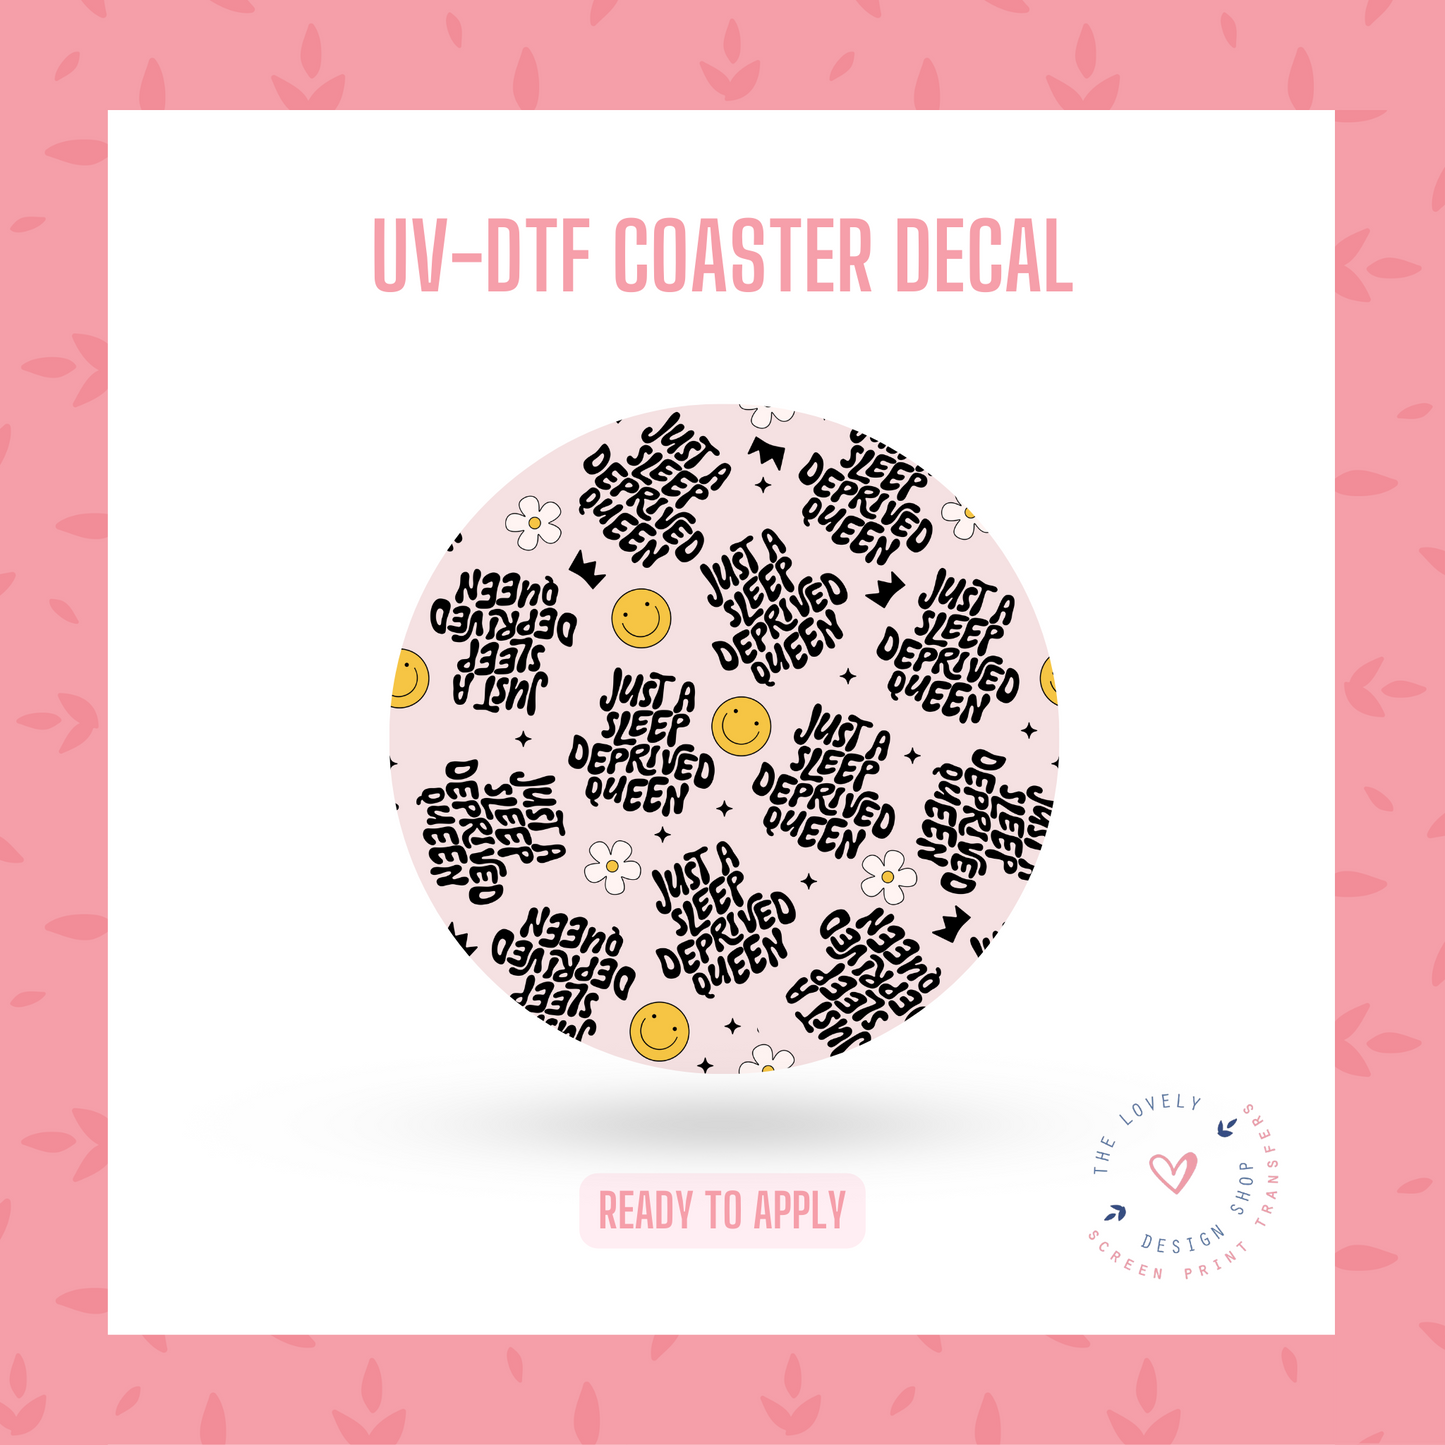 Sleep Deprived Queen  - UV DTF Coaster Decal (Ready to Ship) Apr 17